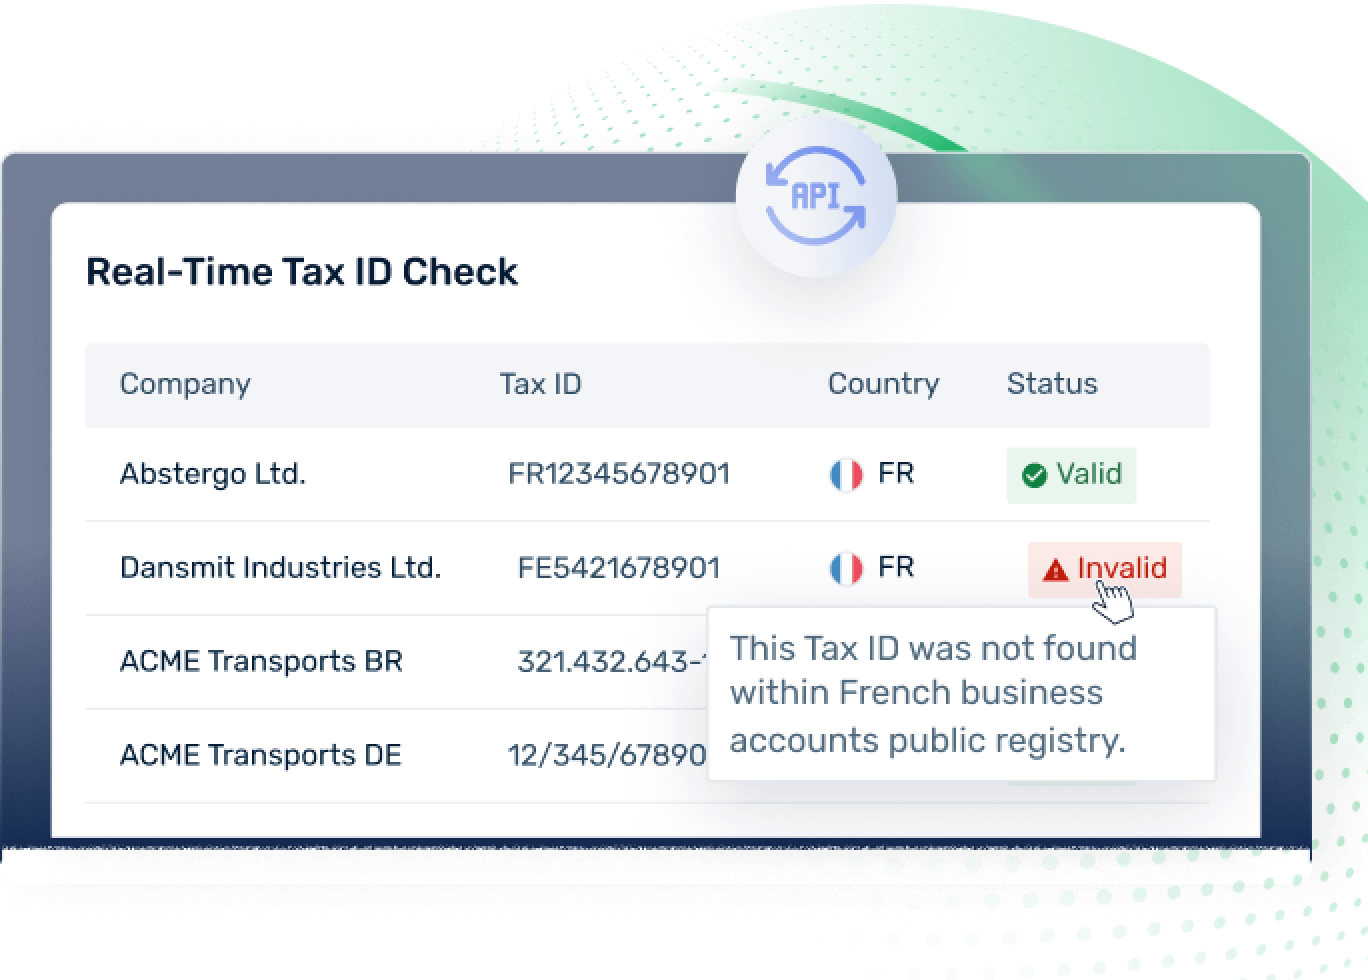 Real-Time Tax ID Check screen